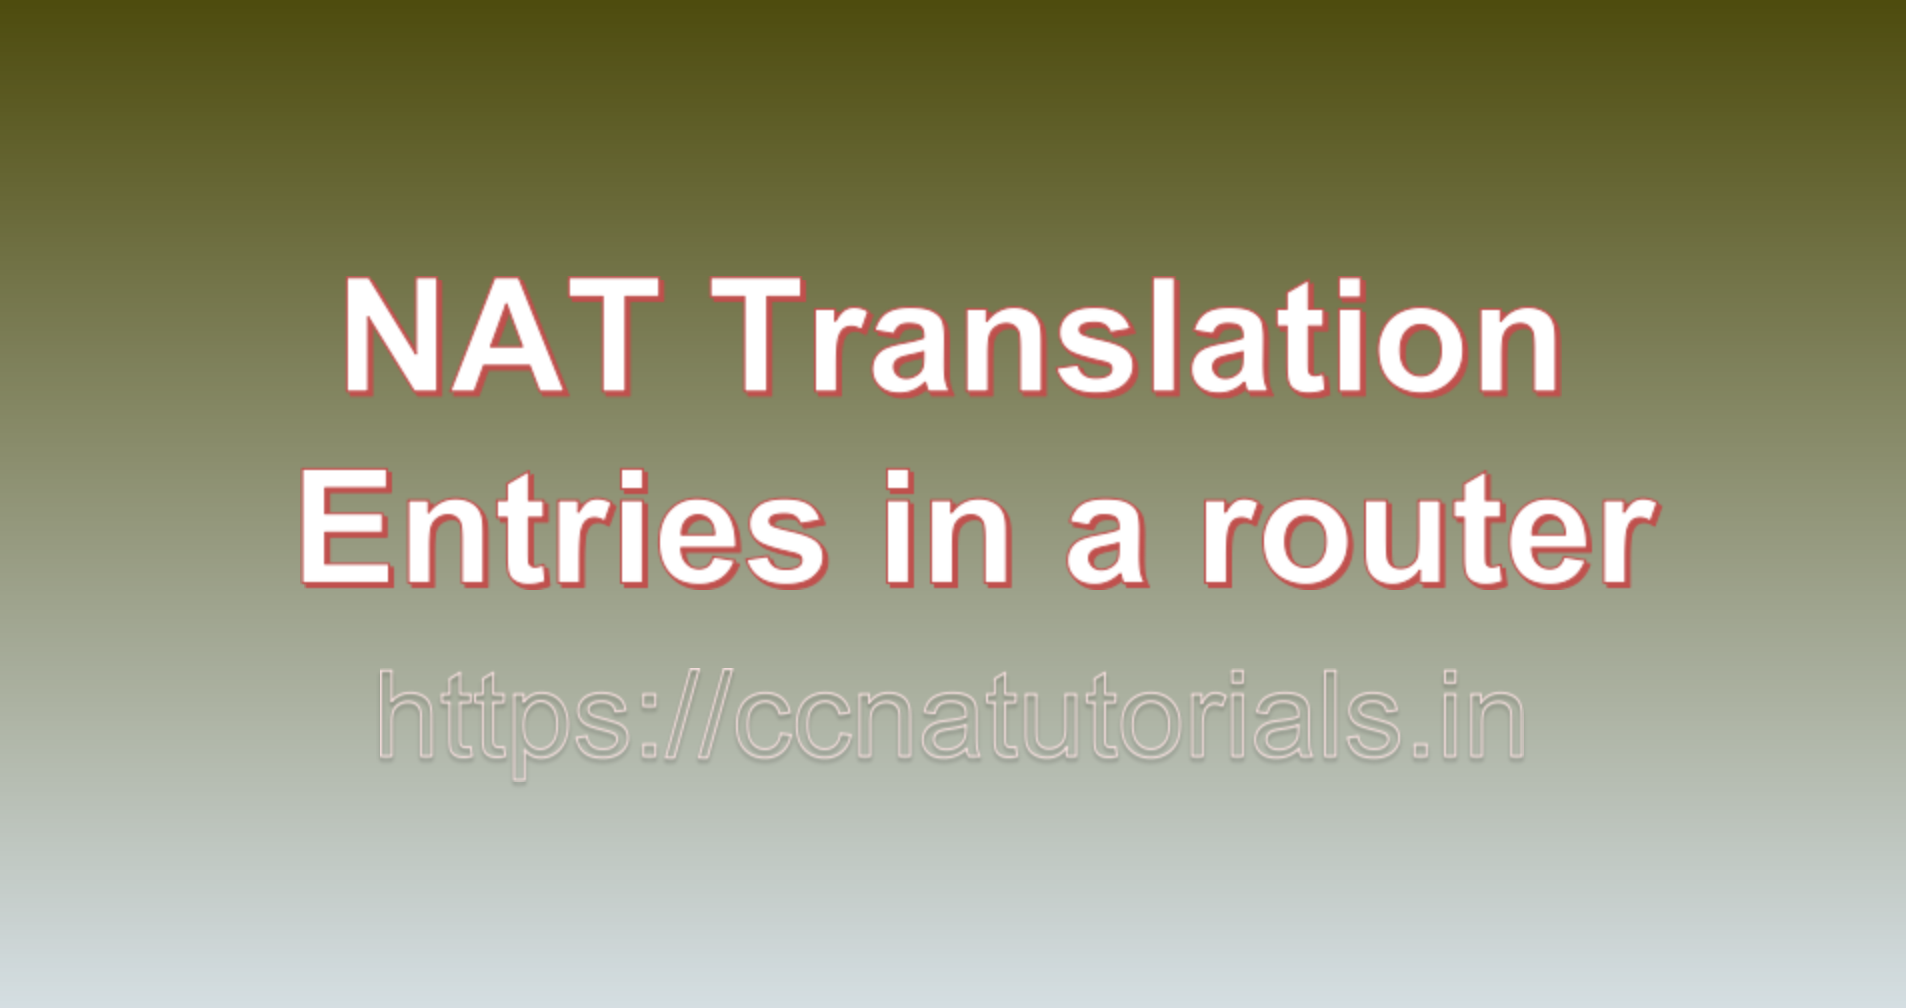 NAT Translation Entries in a router, ccna, ccna tutorials